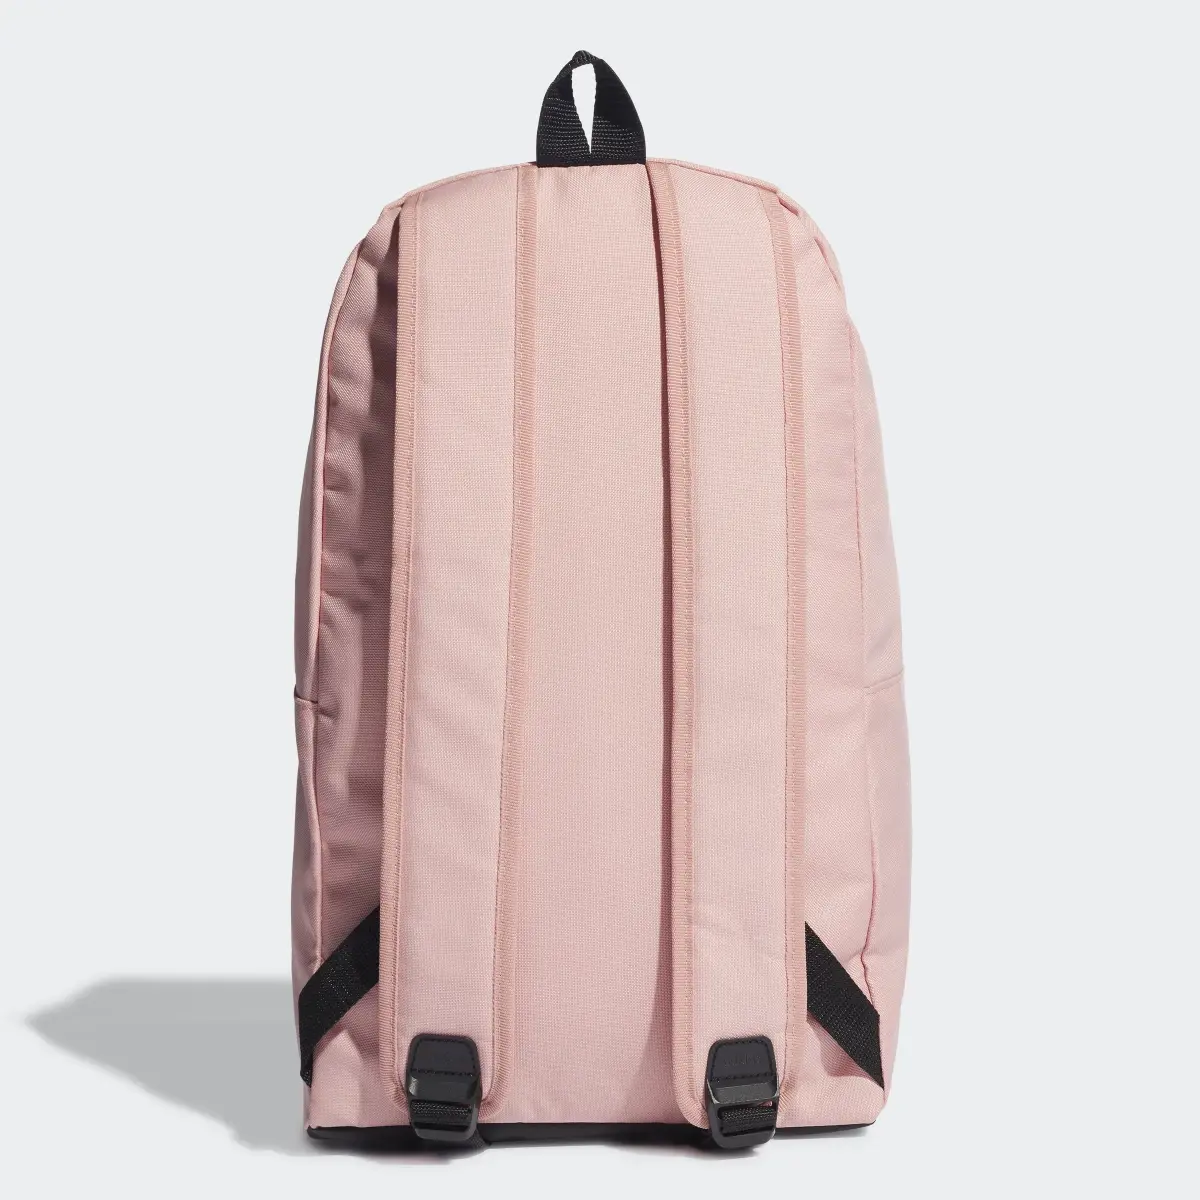 Adidas Linear Classic Daily Rucksack. 3